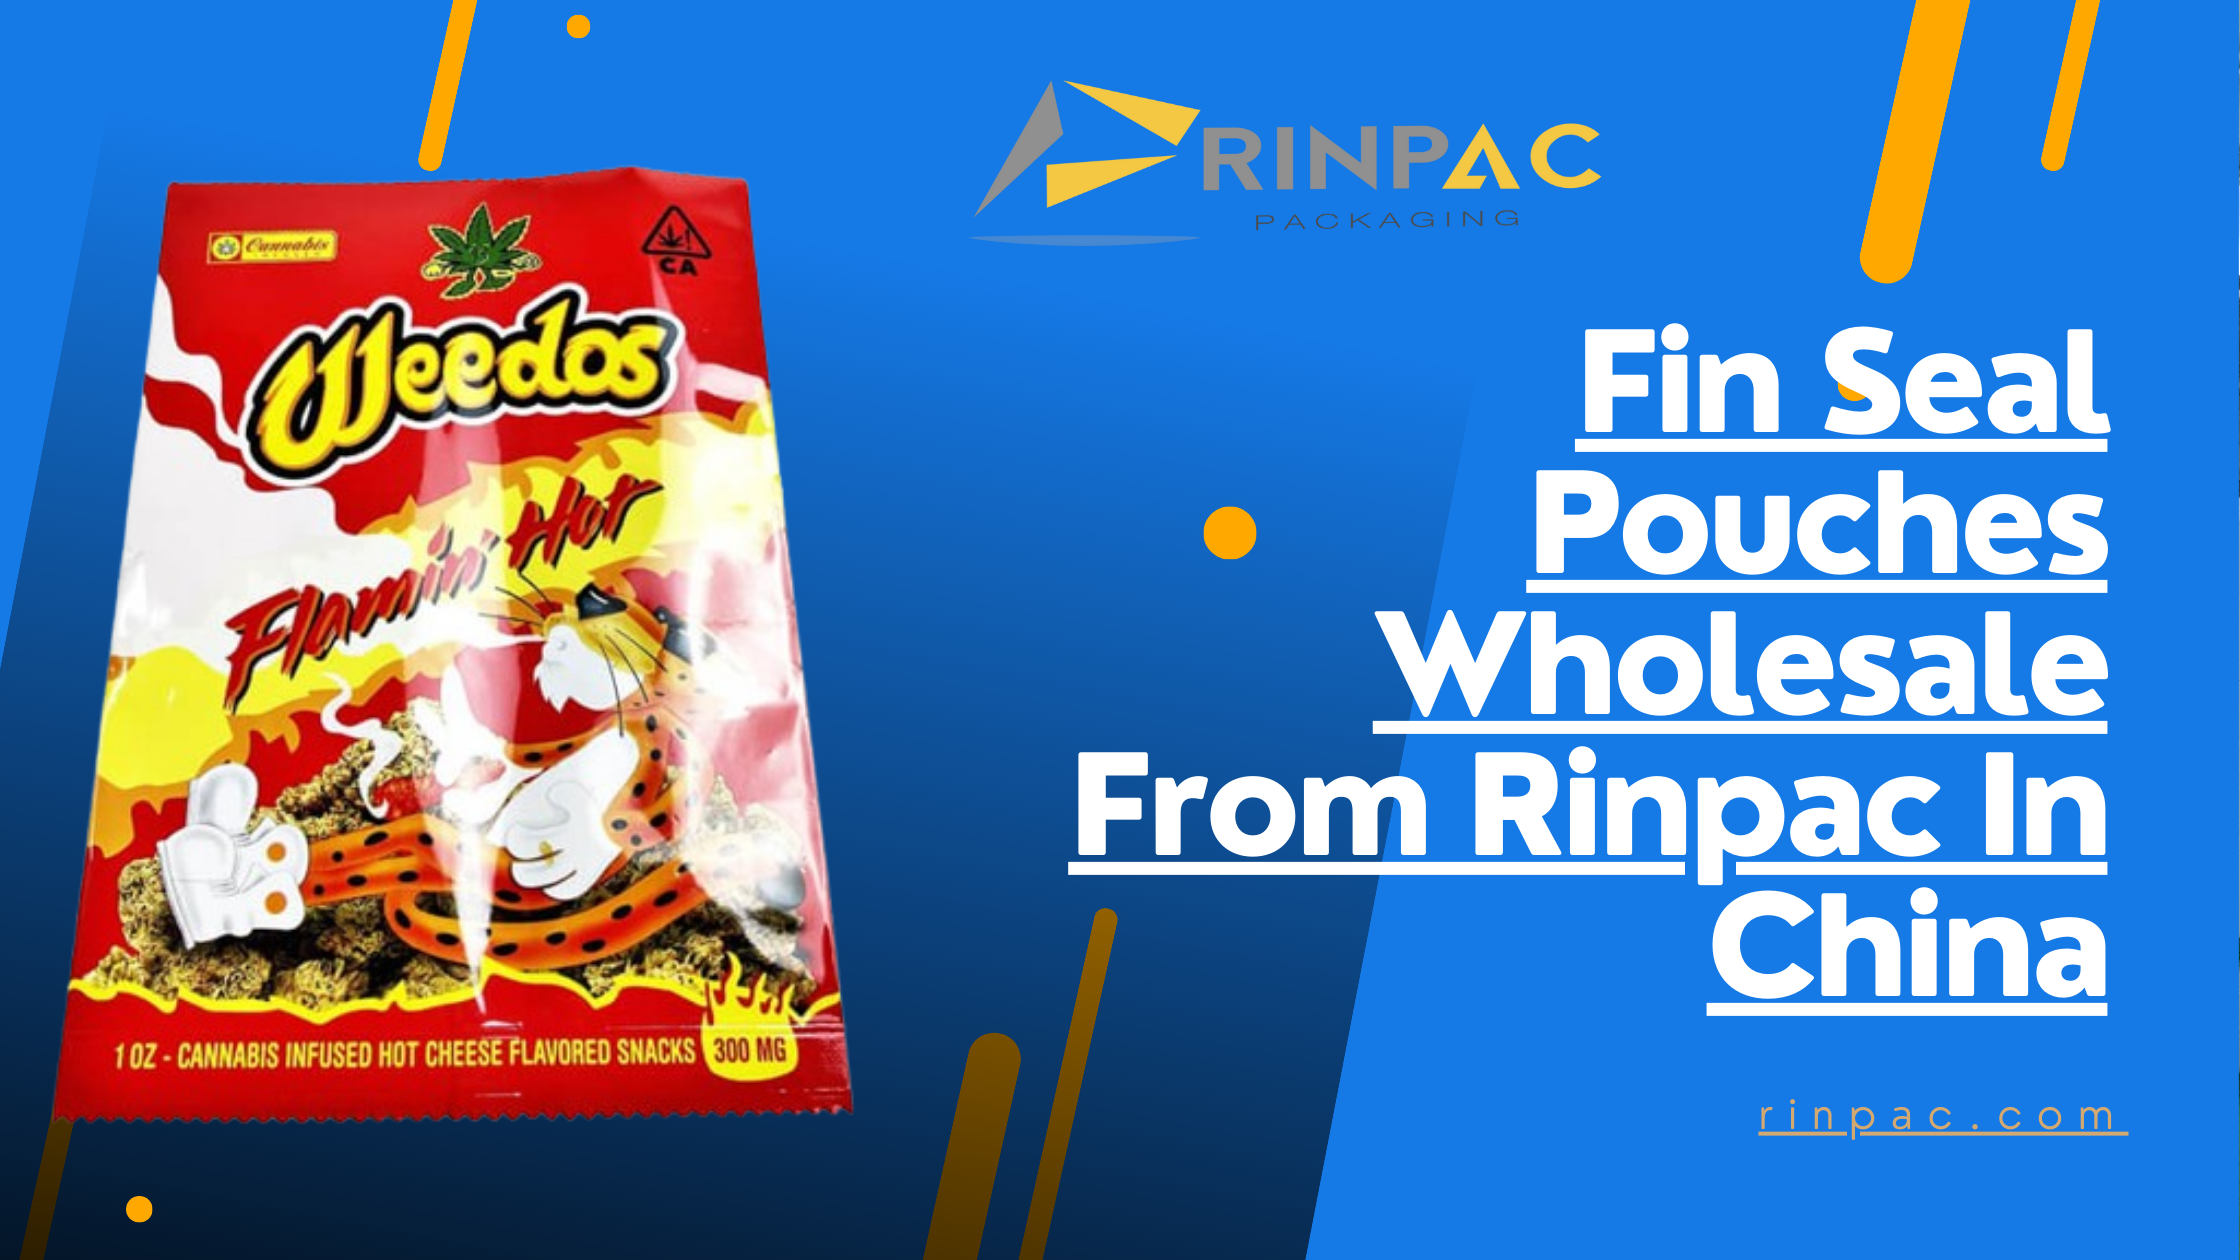 Fin Seal Pouches Wholesale From Rinpac In China